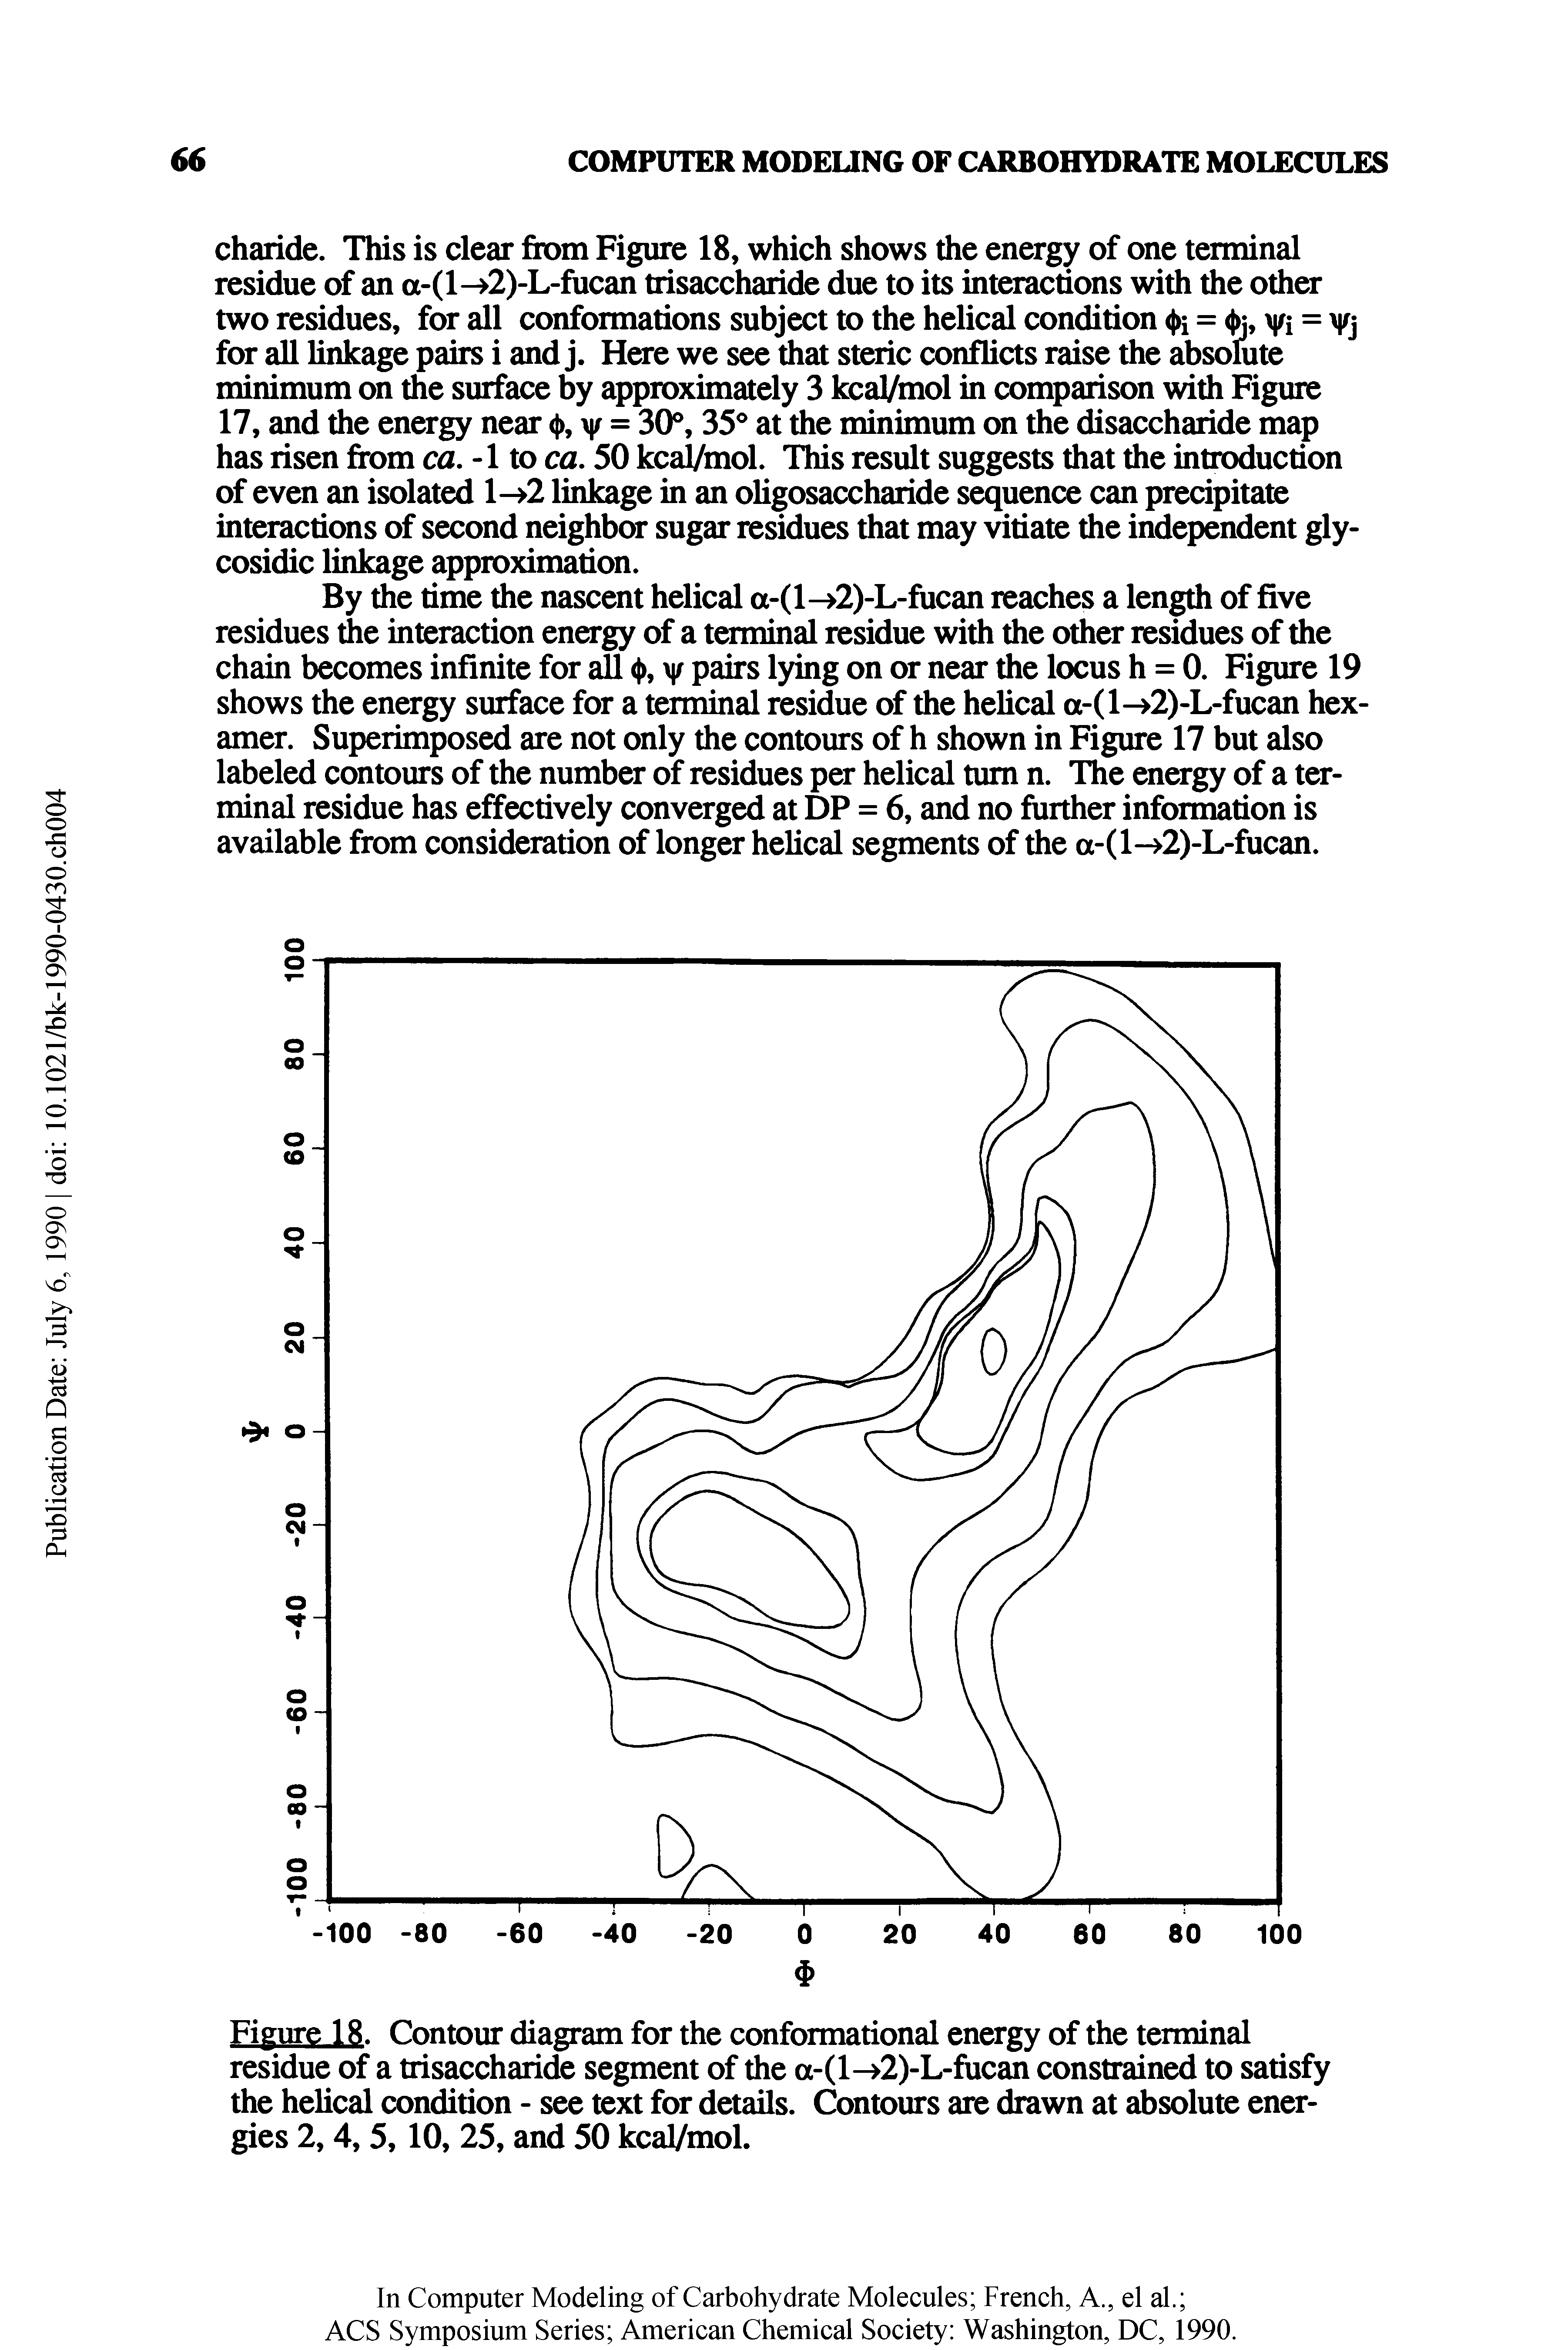 Figure 18. Contour diagram for the conformational energy of the terminal residue of a trisaccharide segment of the a-(1 2)-L-fucan constrained to satisfy the helical condition - see text for details. Contours are drawn at absolute energies 2,4, 5, 10, 25, and 50 kcal/mol.